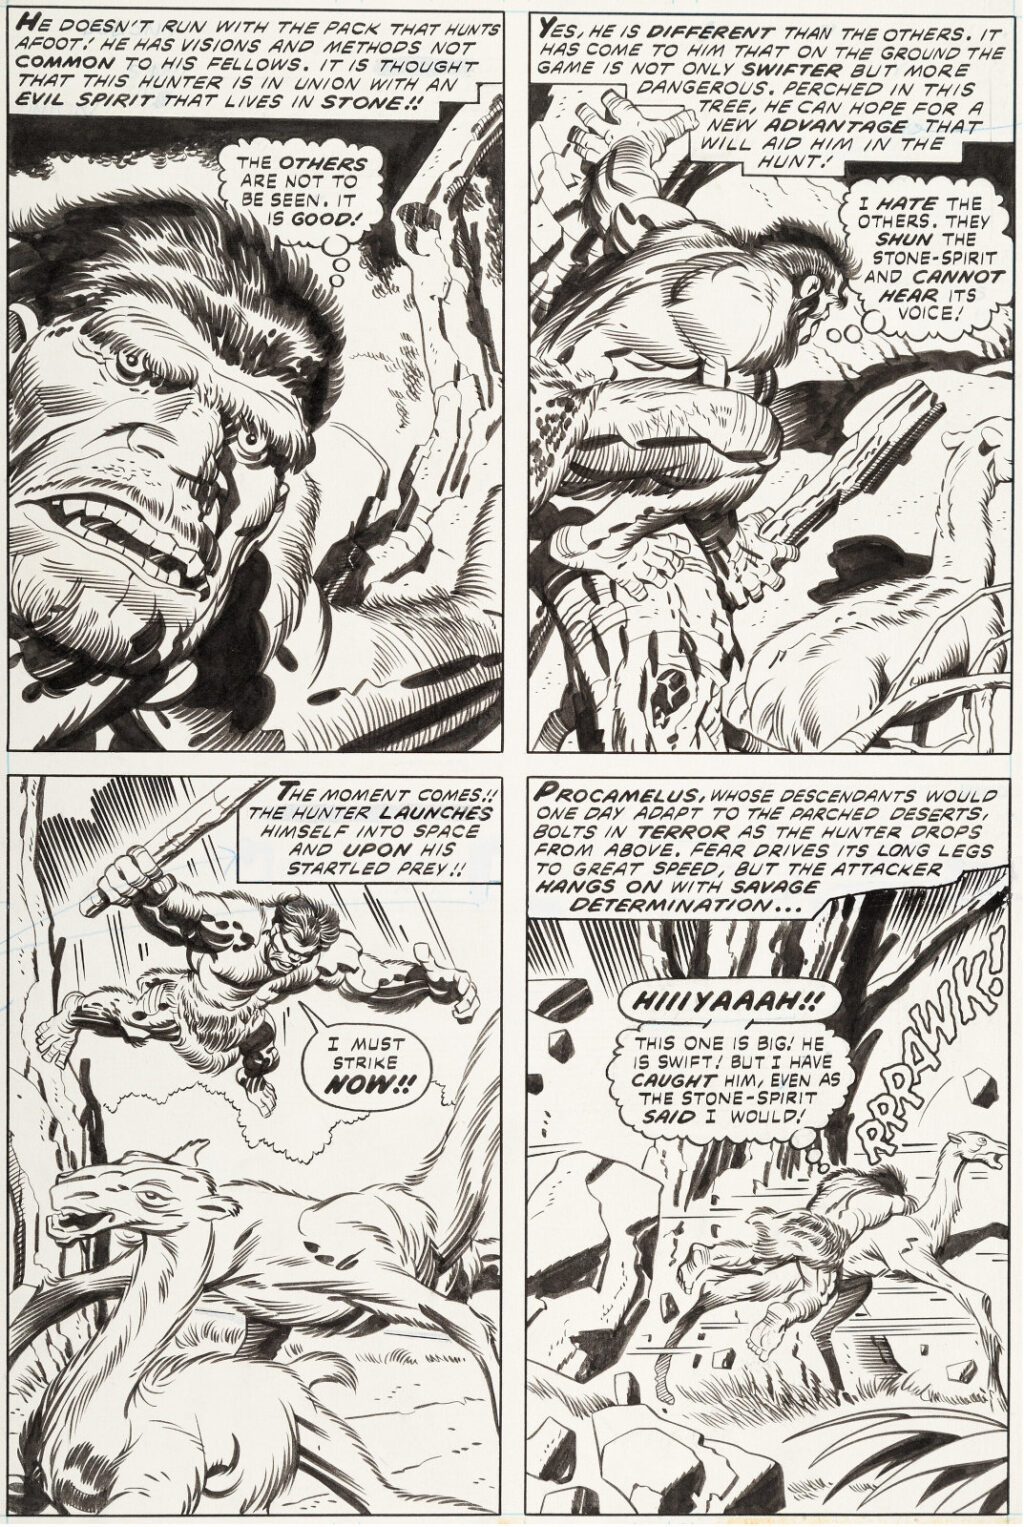 2001 A Space Odyssey issue 1 page 3 by Jack Kirby and Mike Royer